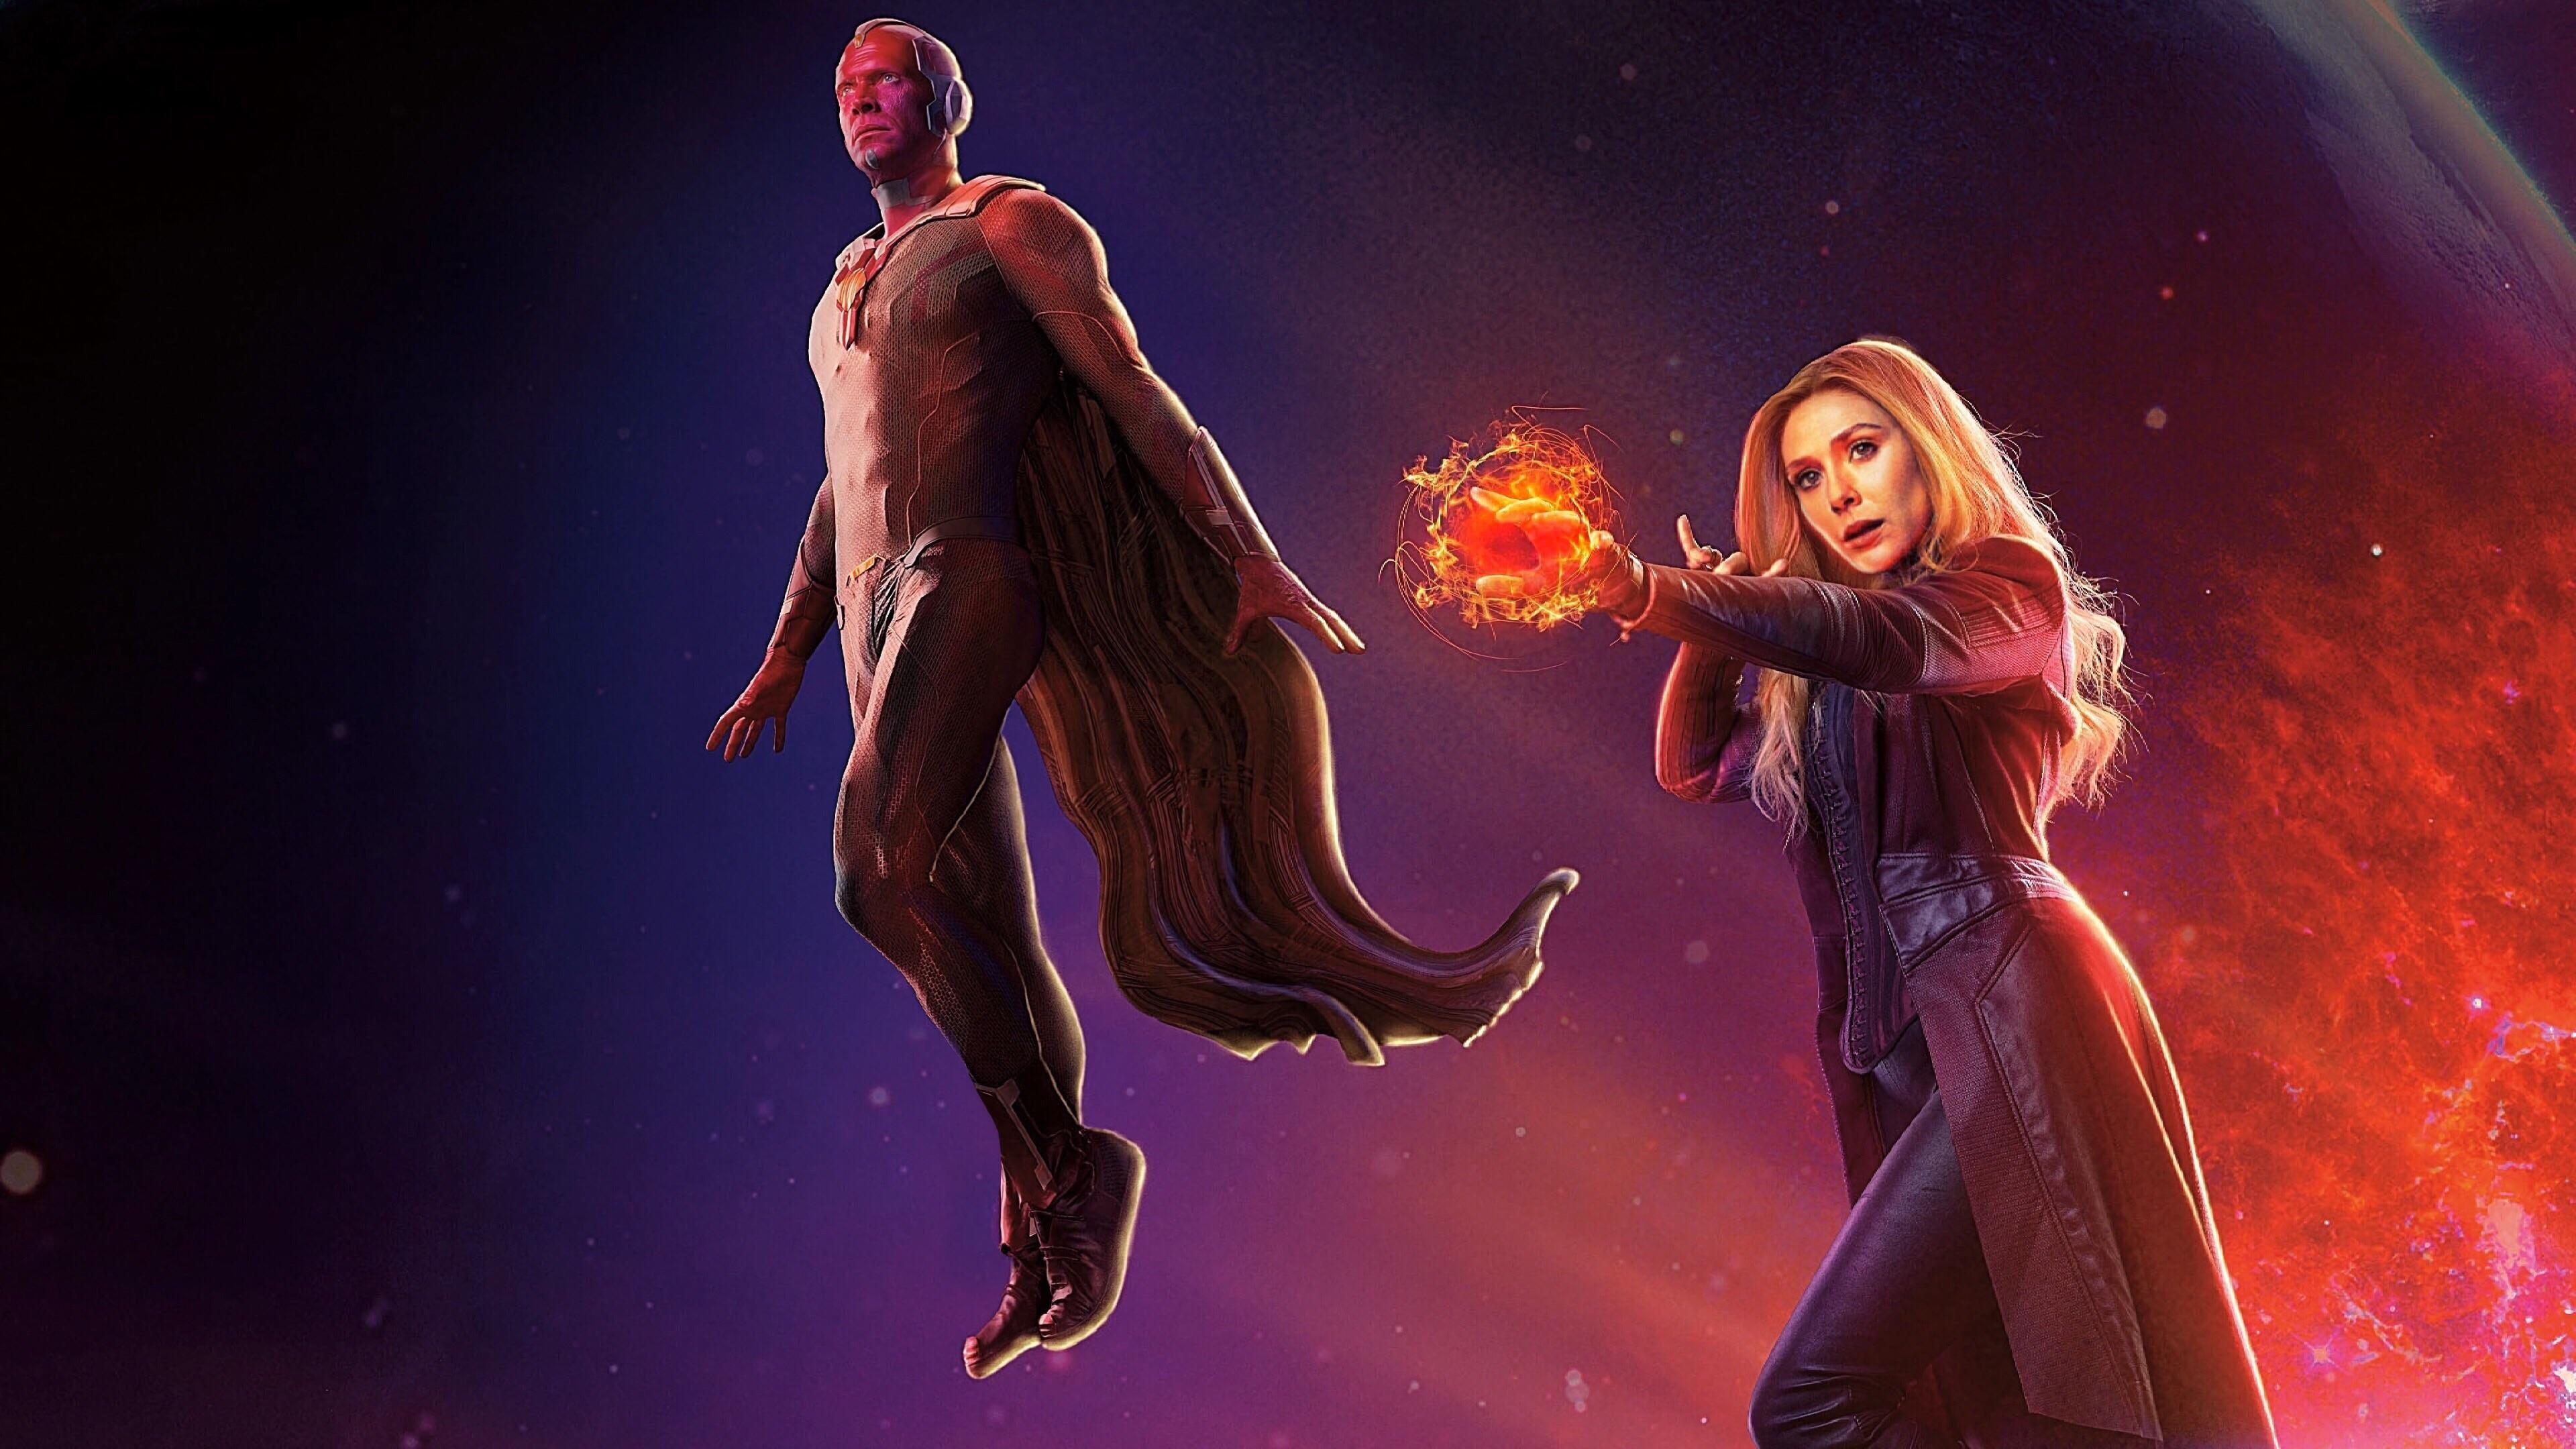 Avengers Infinity War Scarlet Witch and Vision 4k wallpapers